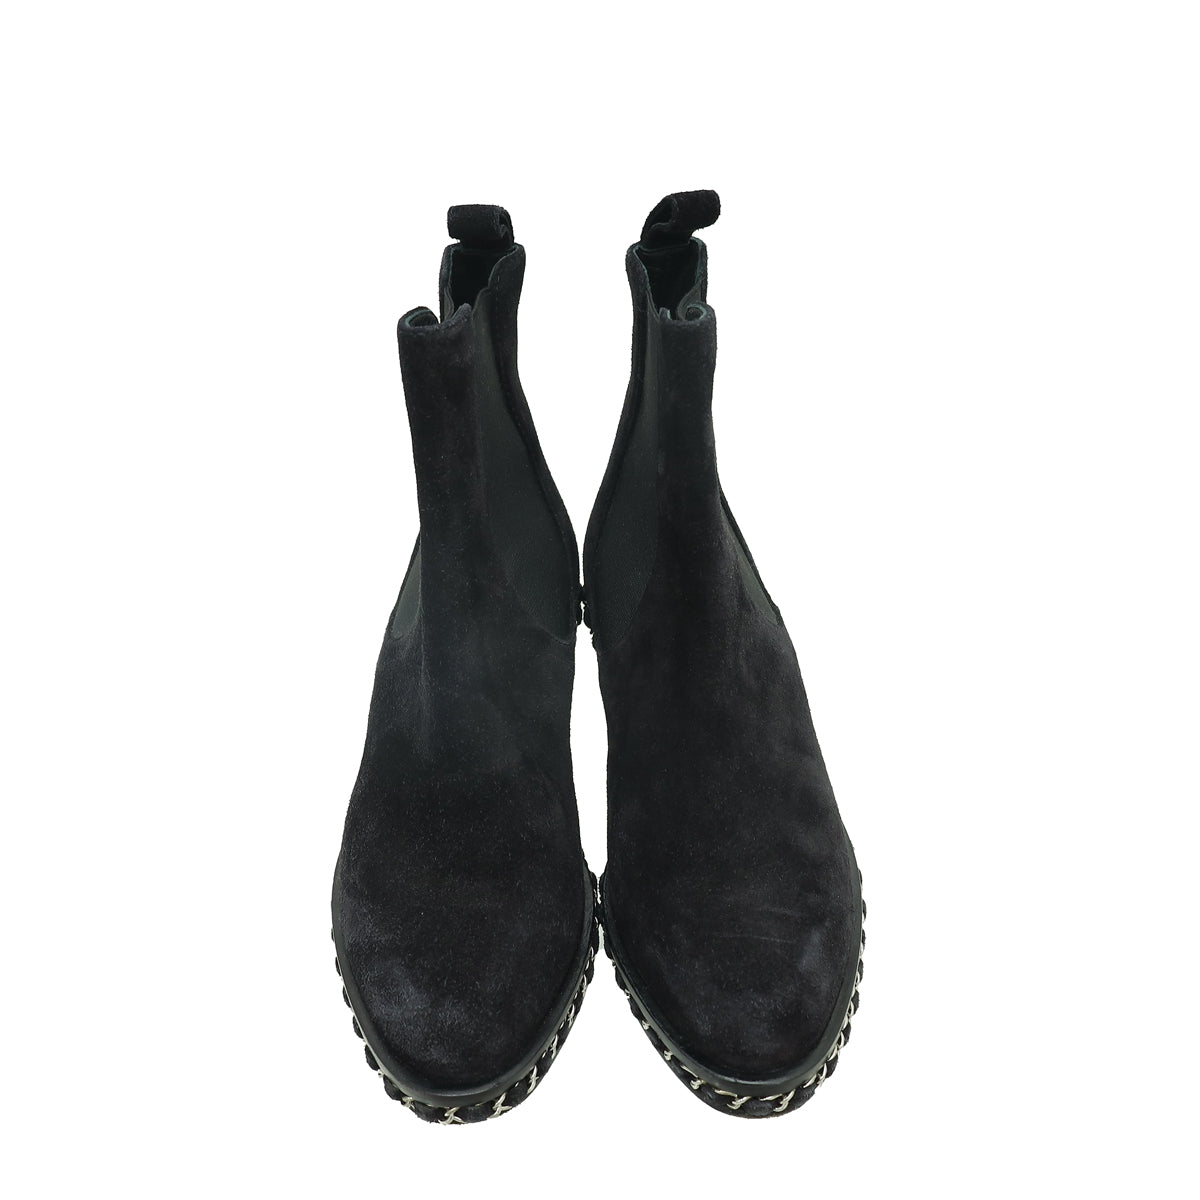 Chanel Black Suede Chain Around Chelsea Ankle Boots 36